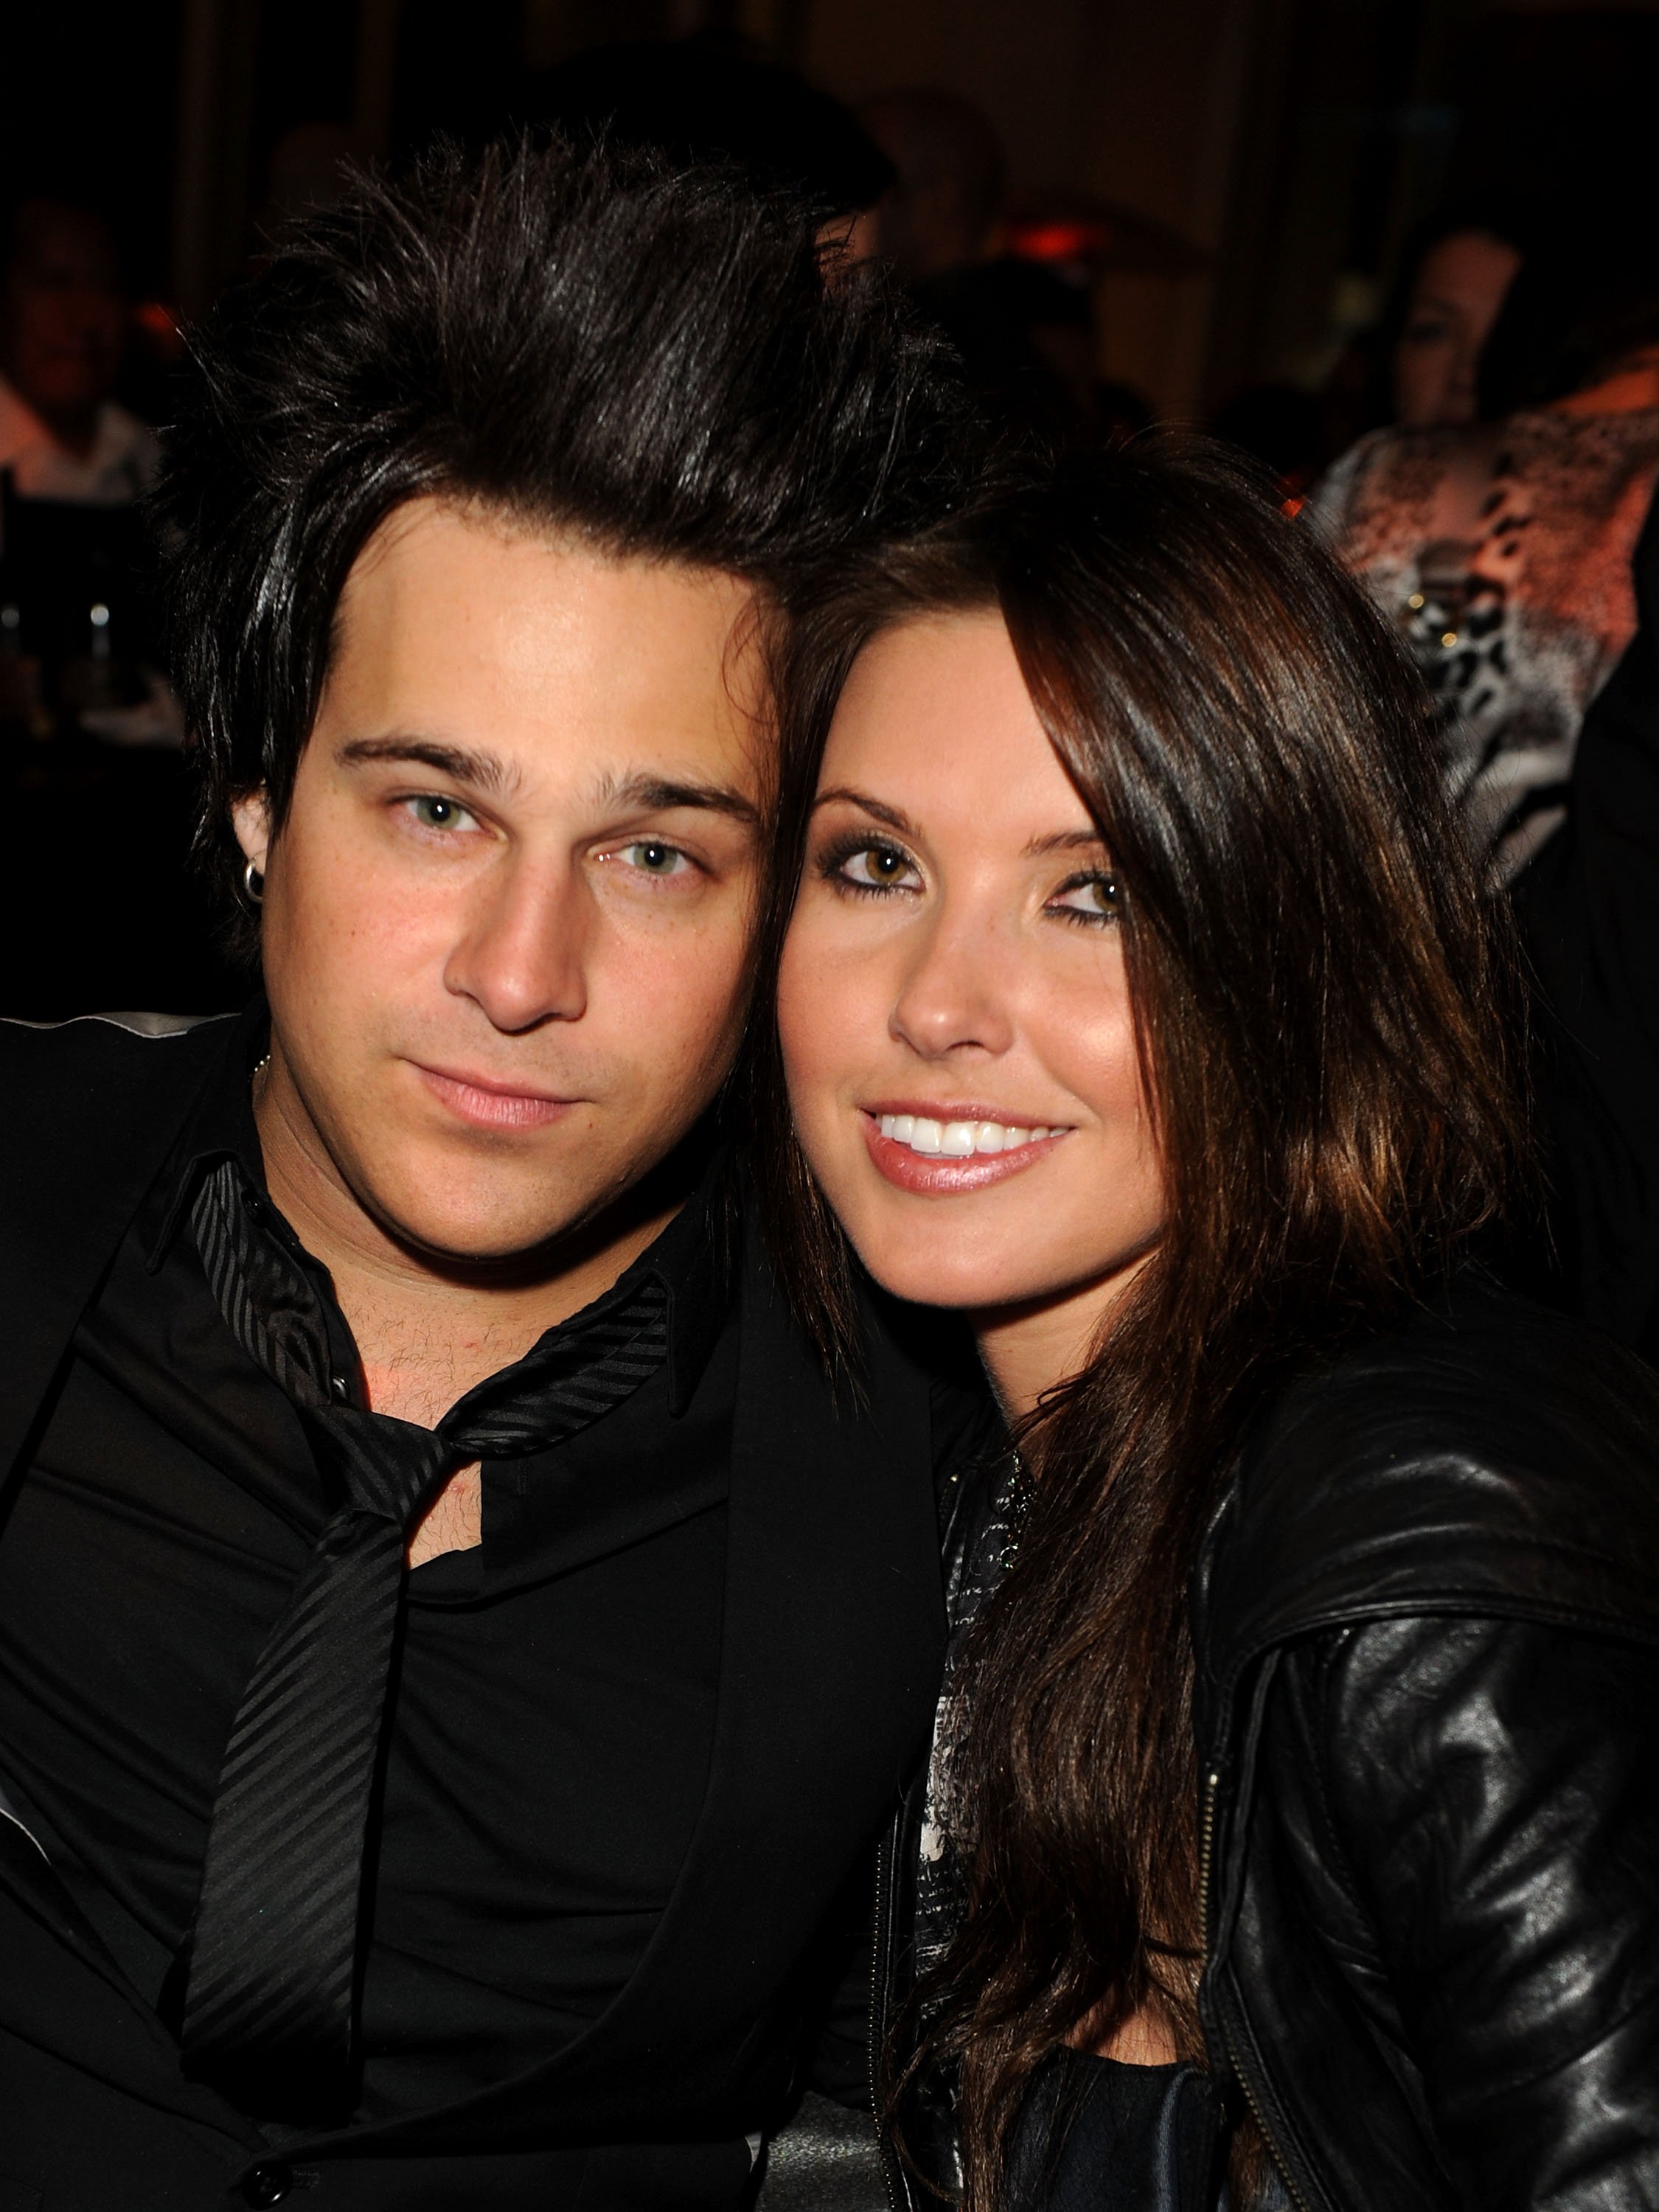 Ryan Cabrera and Audrina Patridge at the grand opening party for Delphine restaurant on February 11, 2010 | Source: Getty Images